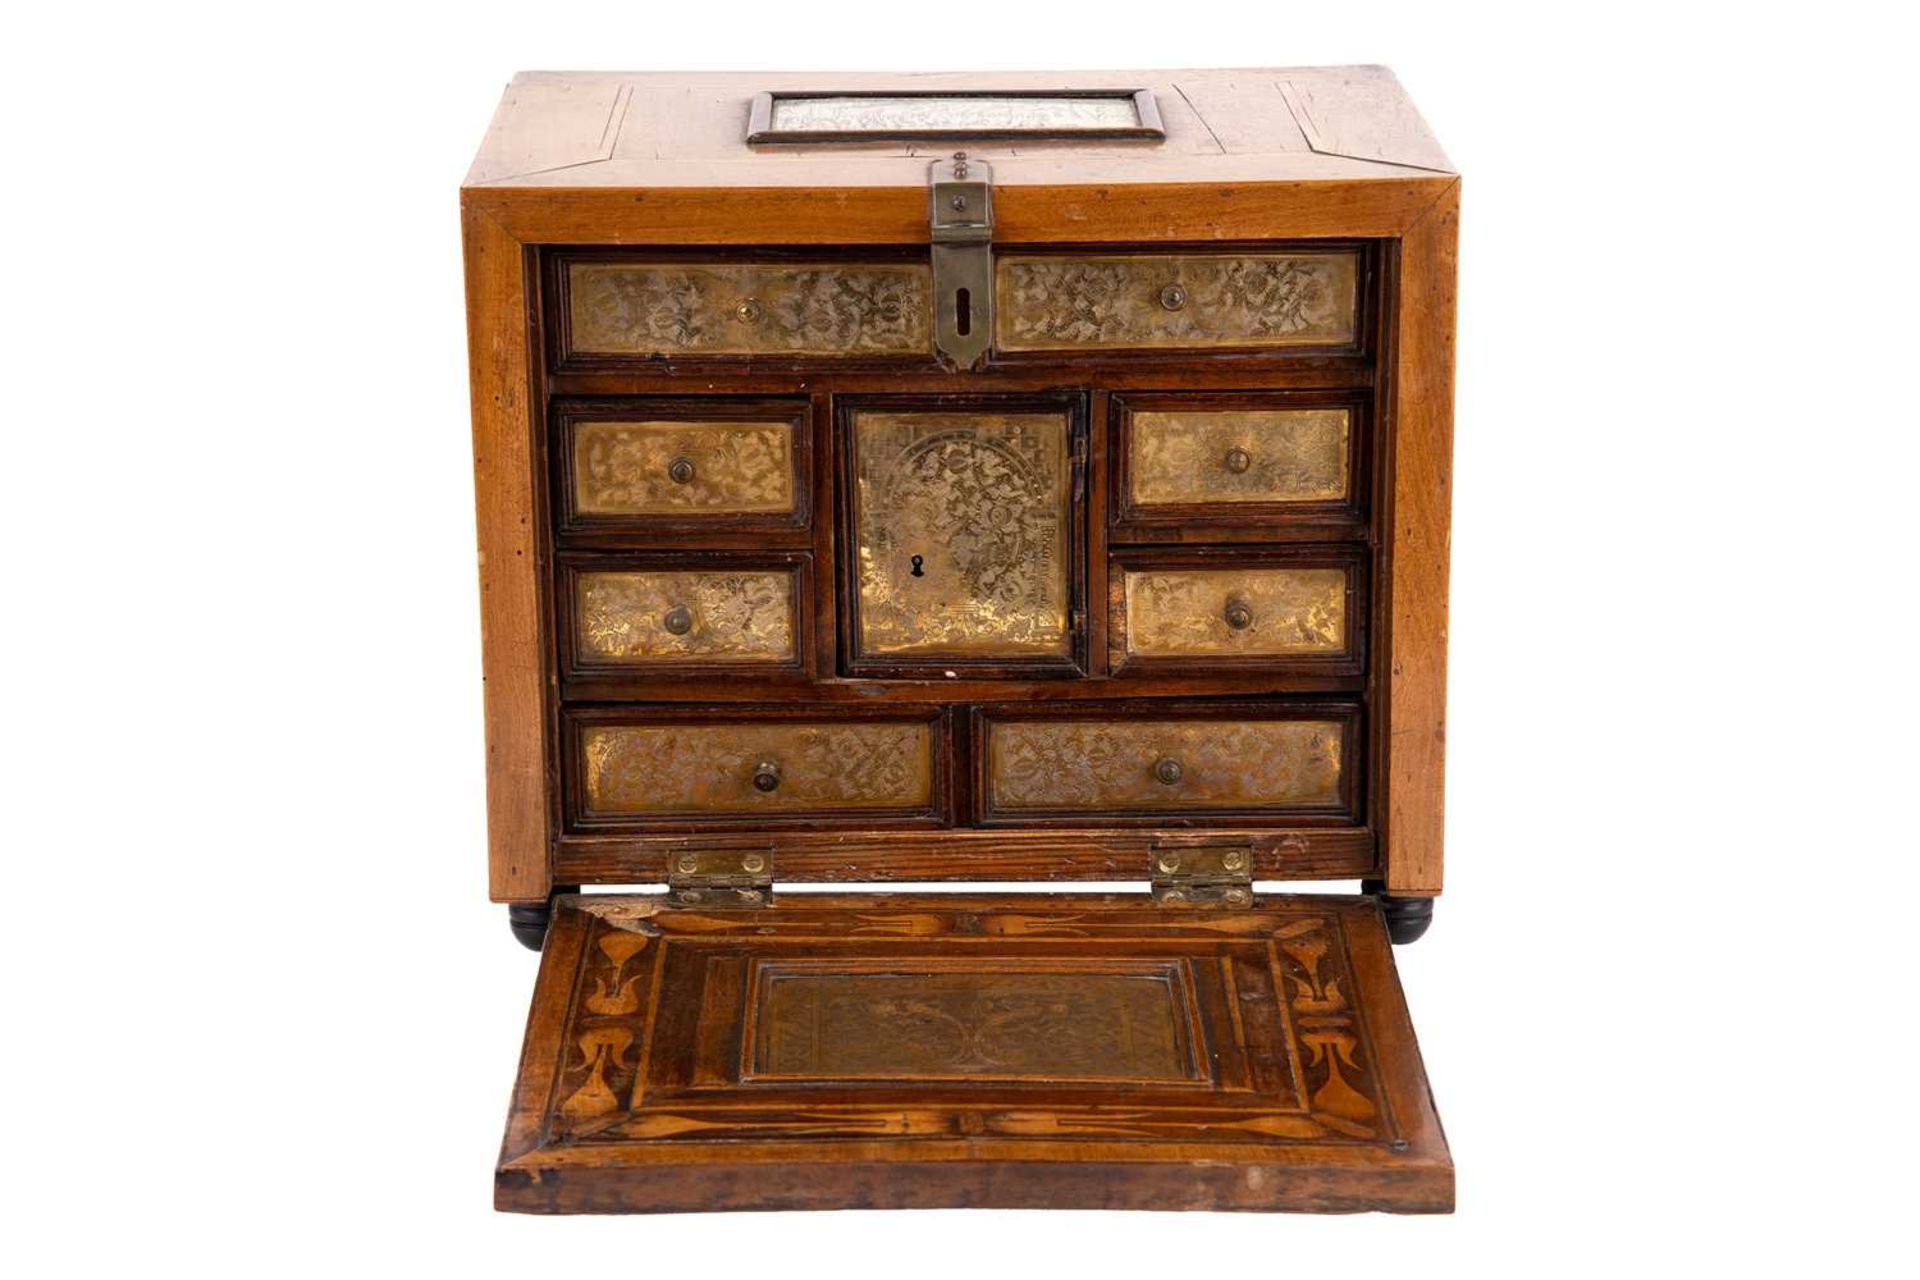 An early to mid 17th century South German Augsburg-type walnut table cabinet, the exterior with simp - Bild 2 aus 15